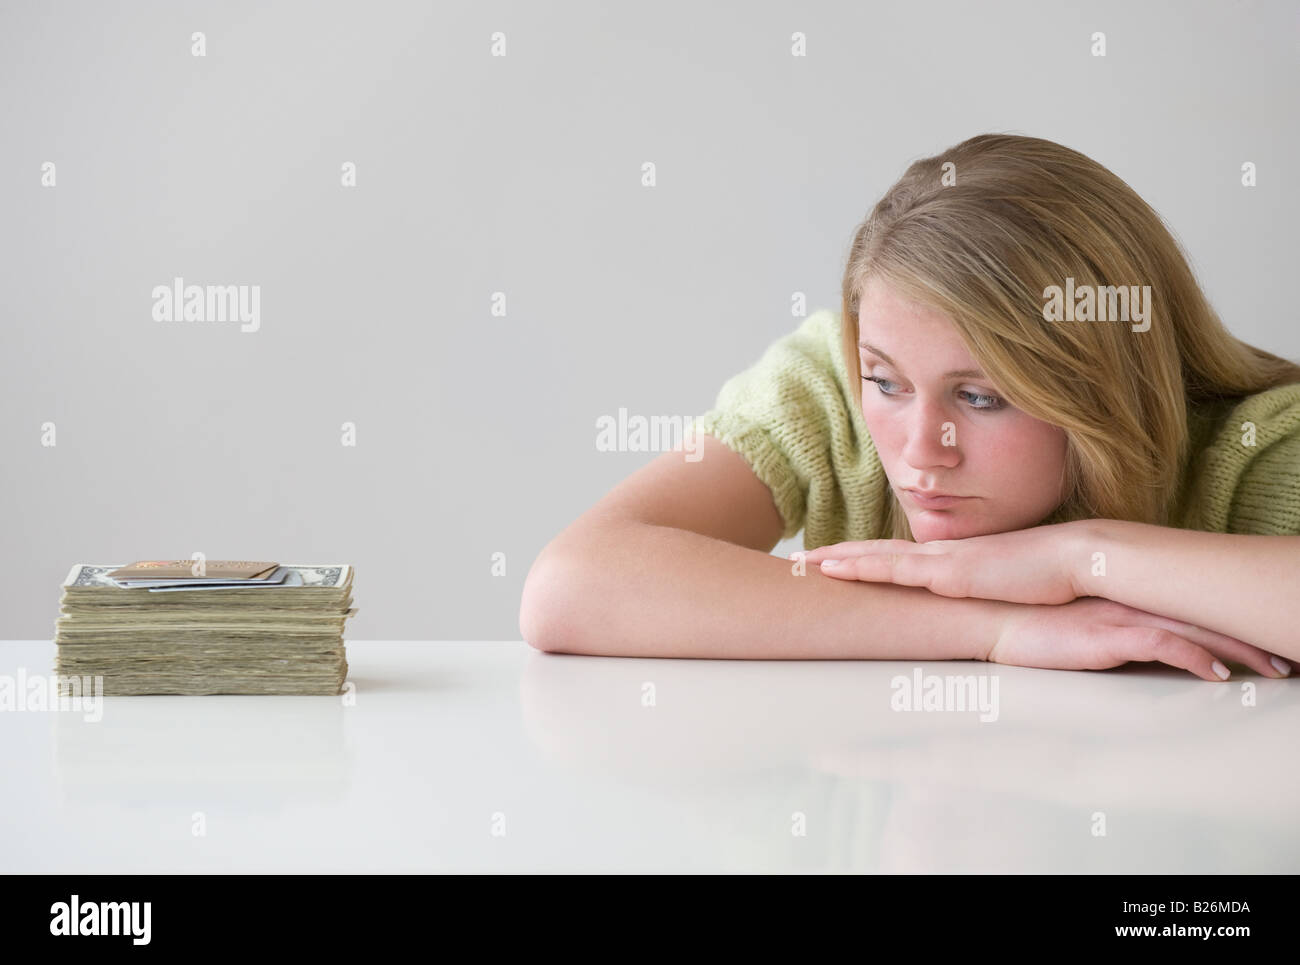 Teenaged girl looking at stack of money Stock Photo